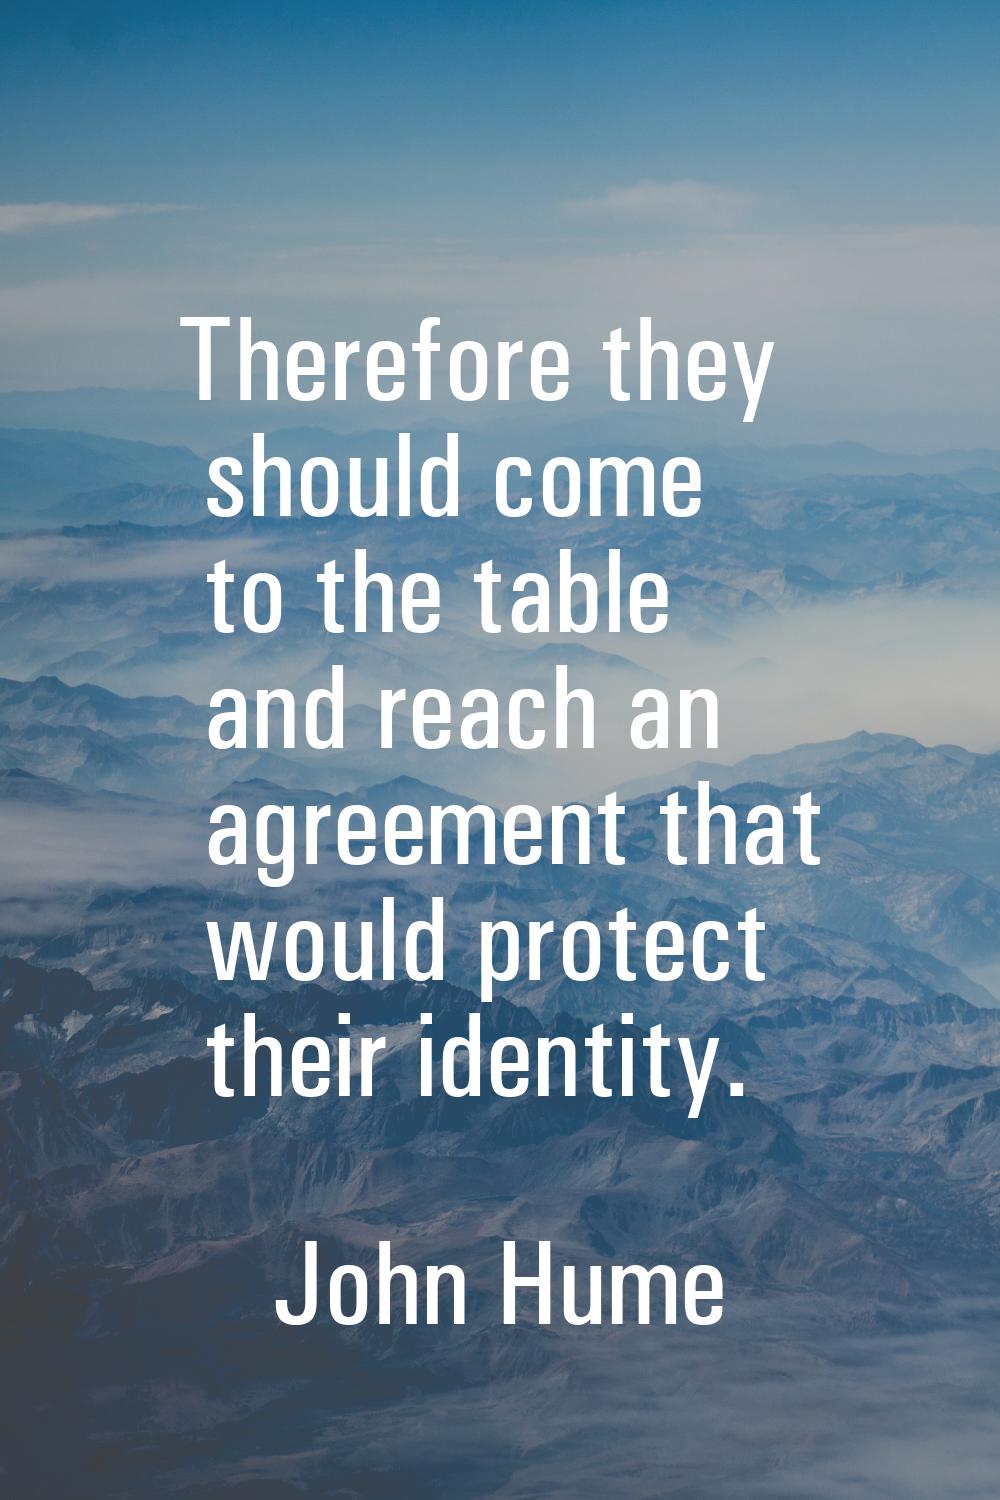 Therefore they should come to the table and reach an agreement that would protect their identity.